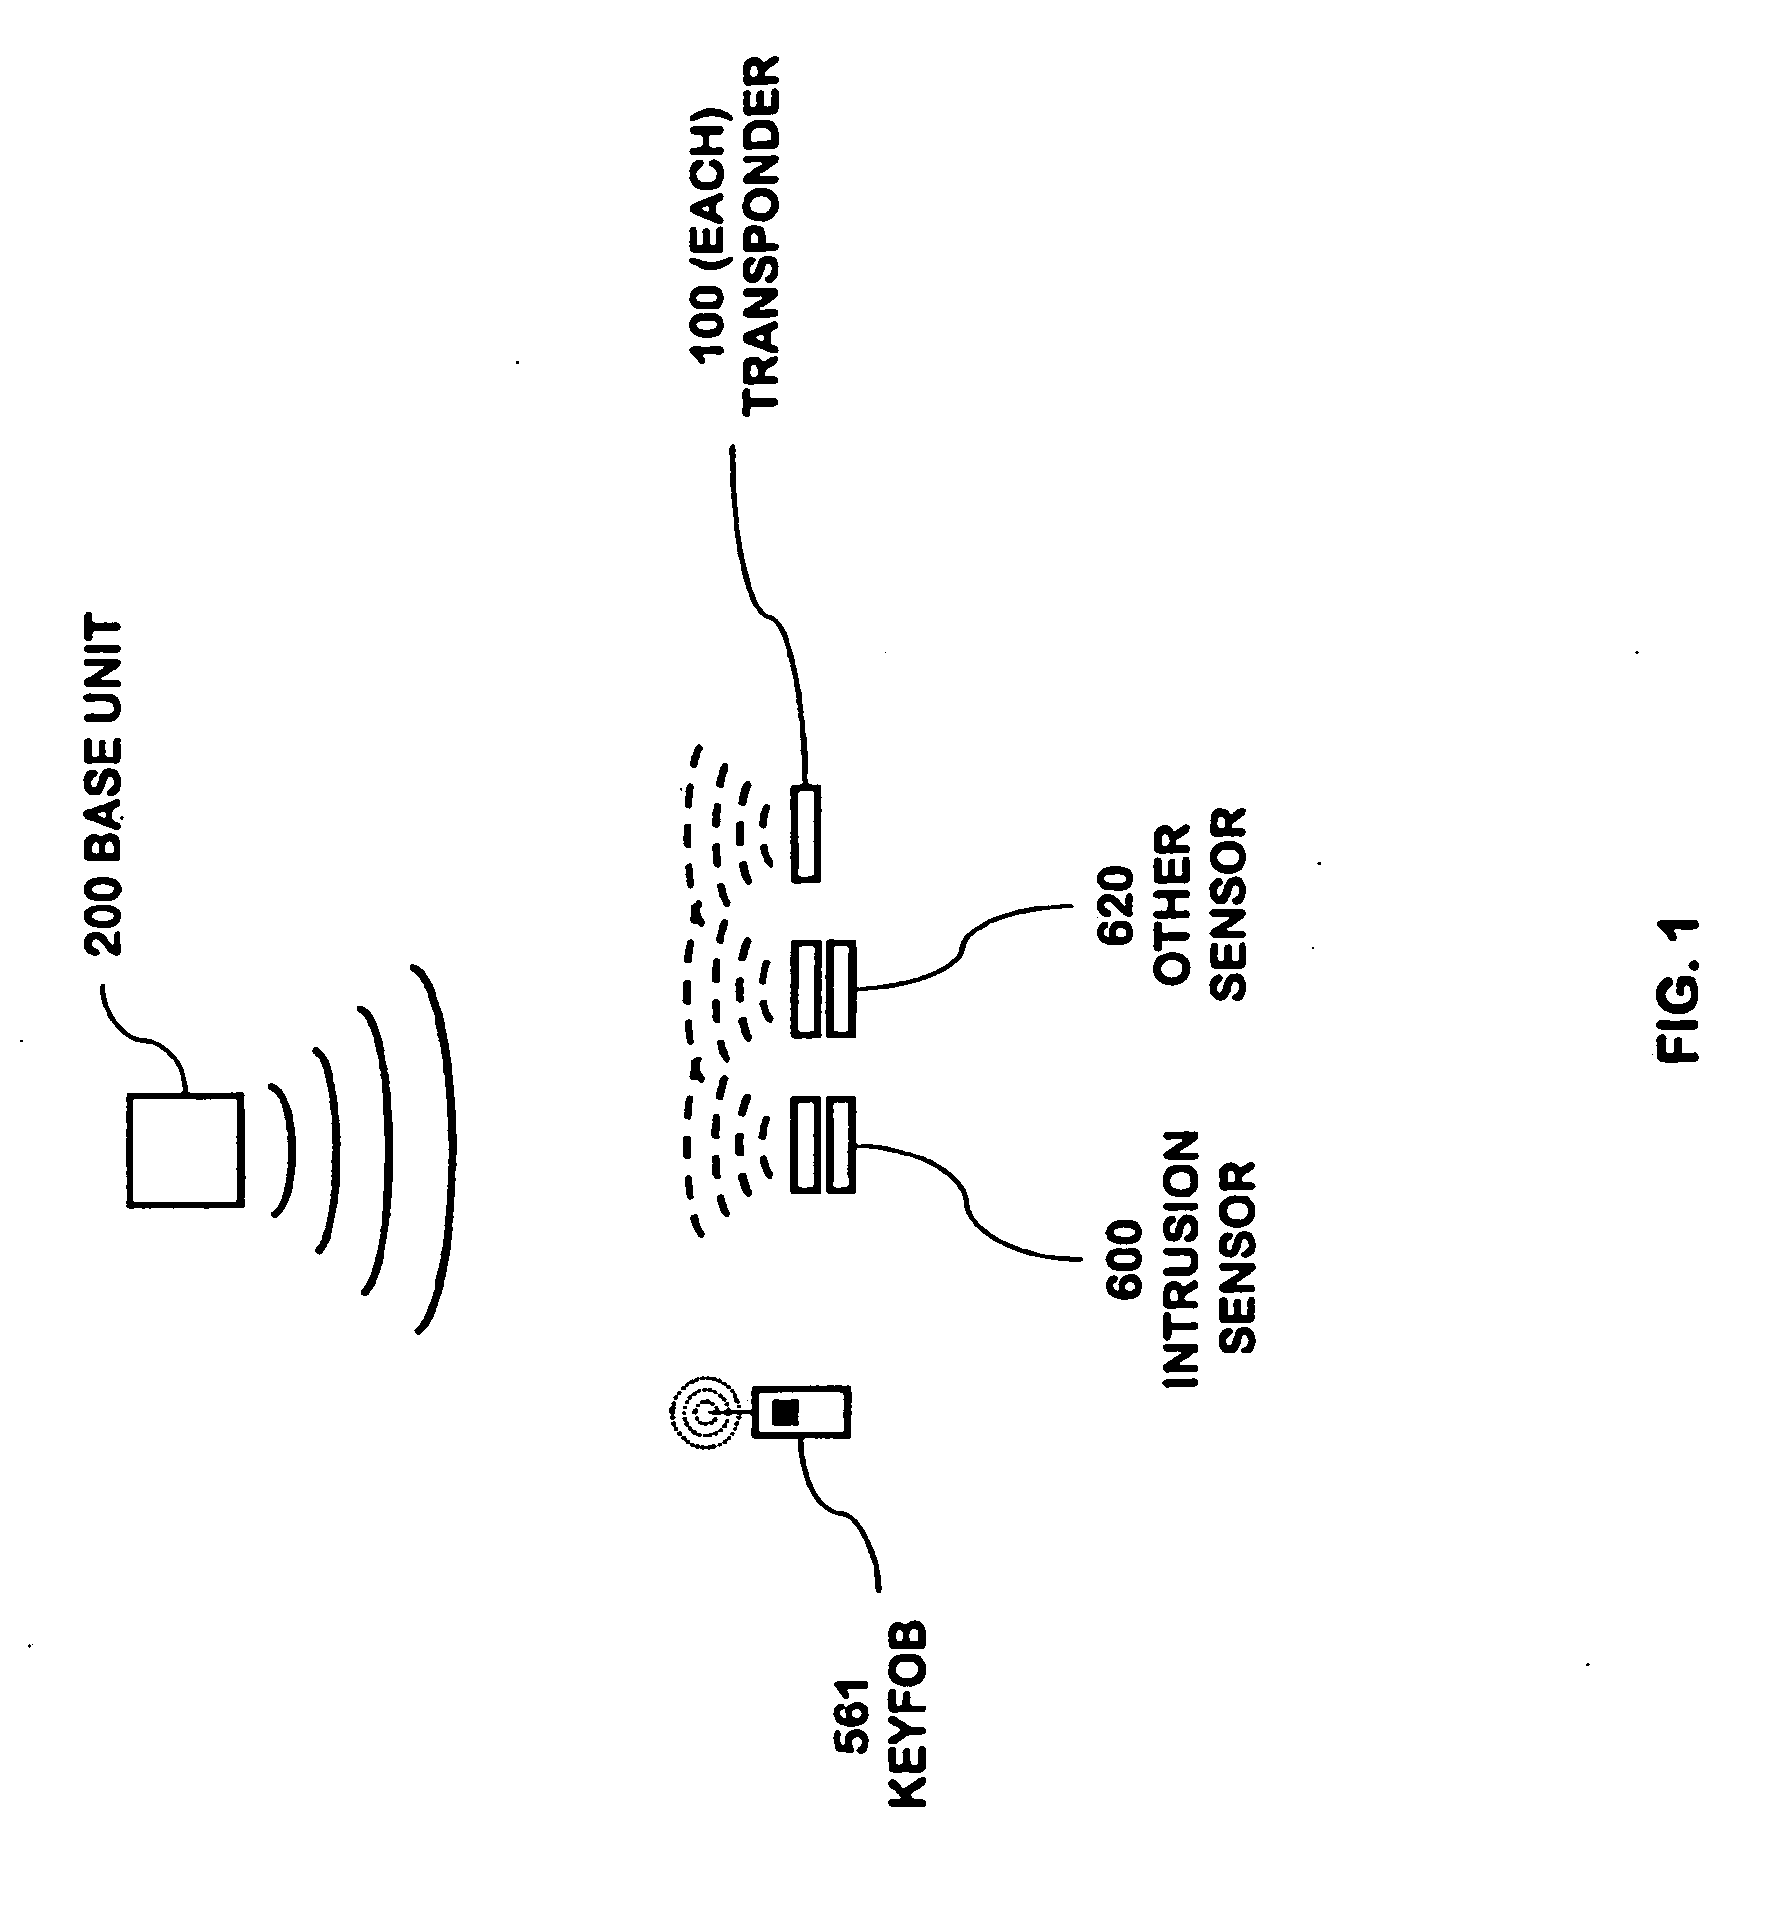 Portable telephone in a security network